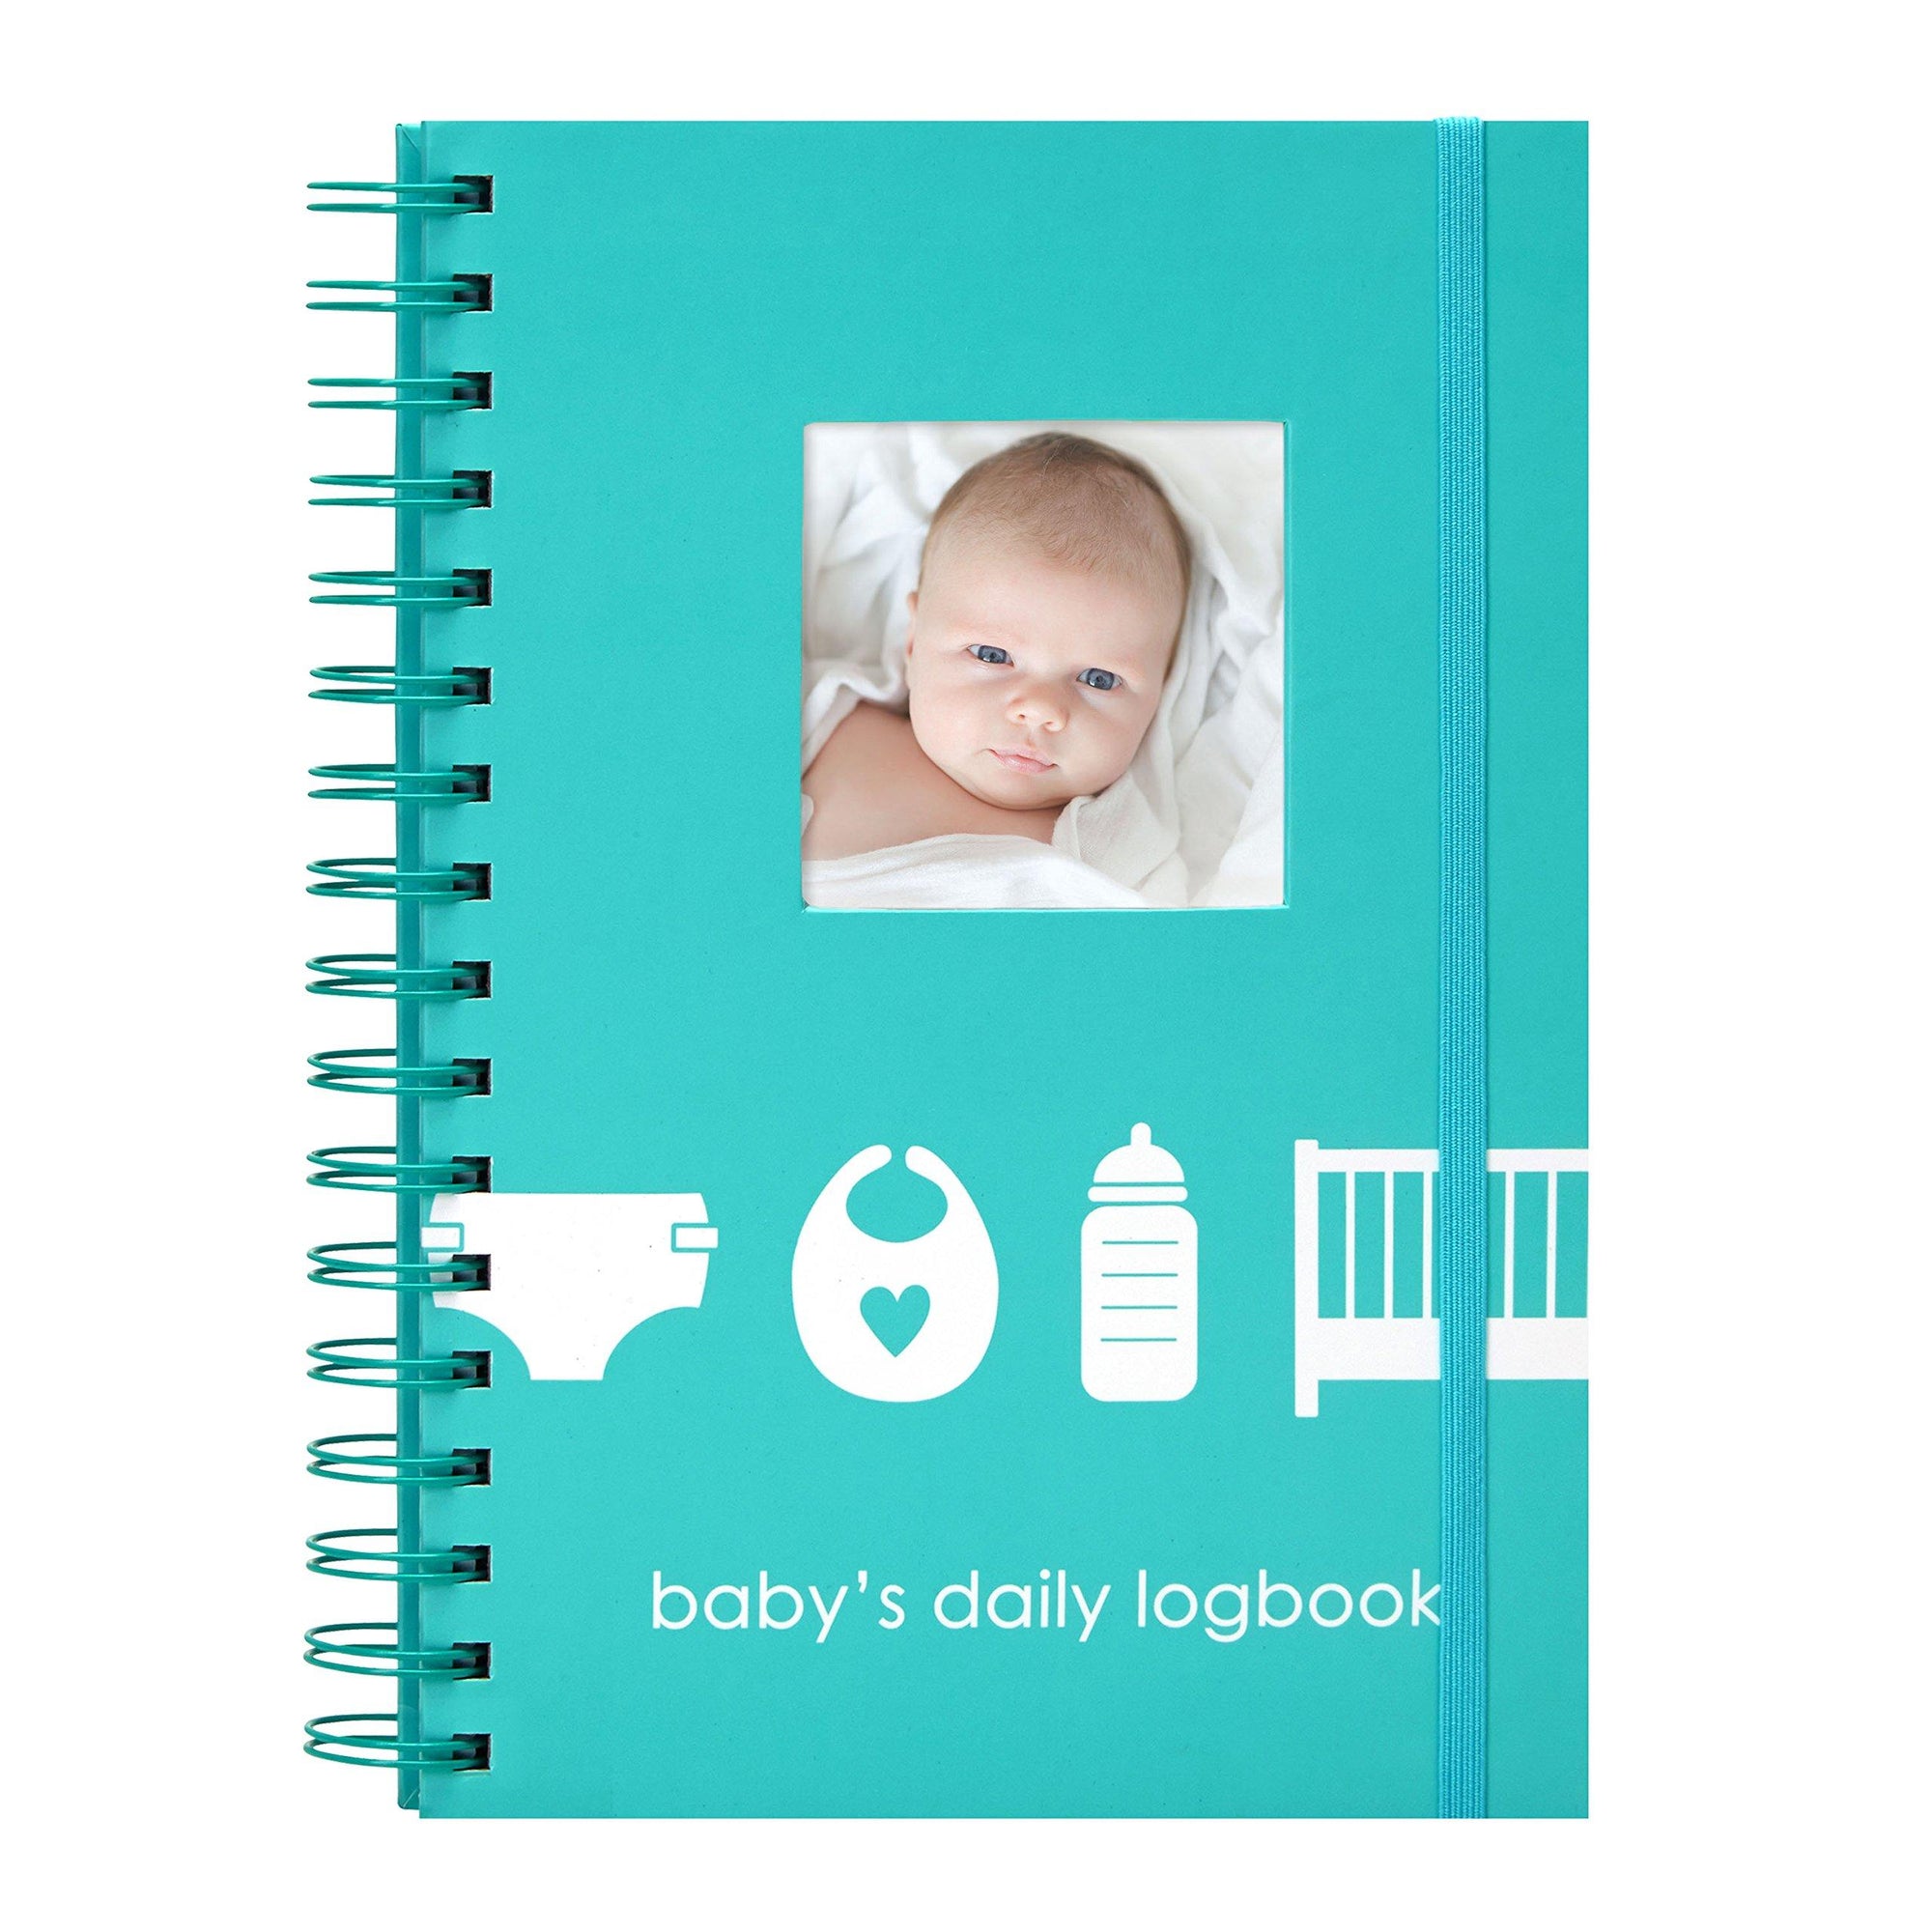 Baby's Daily logbook